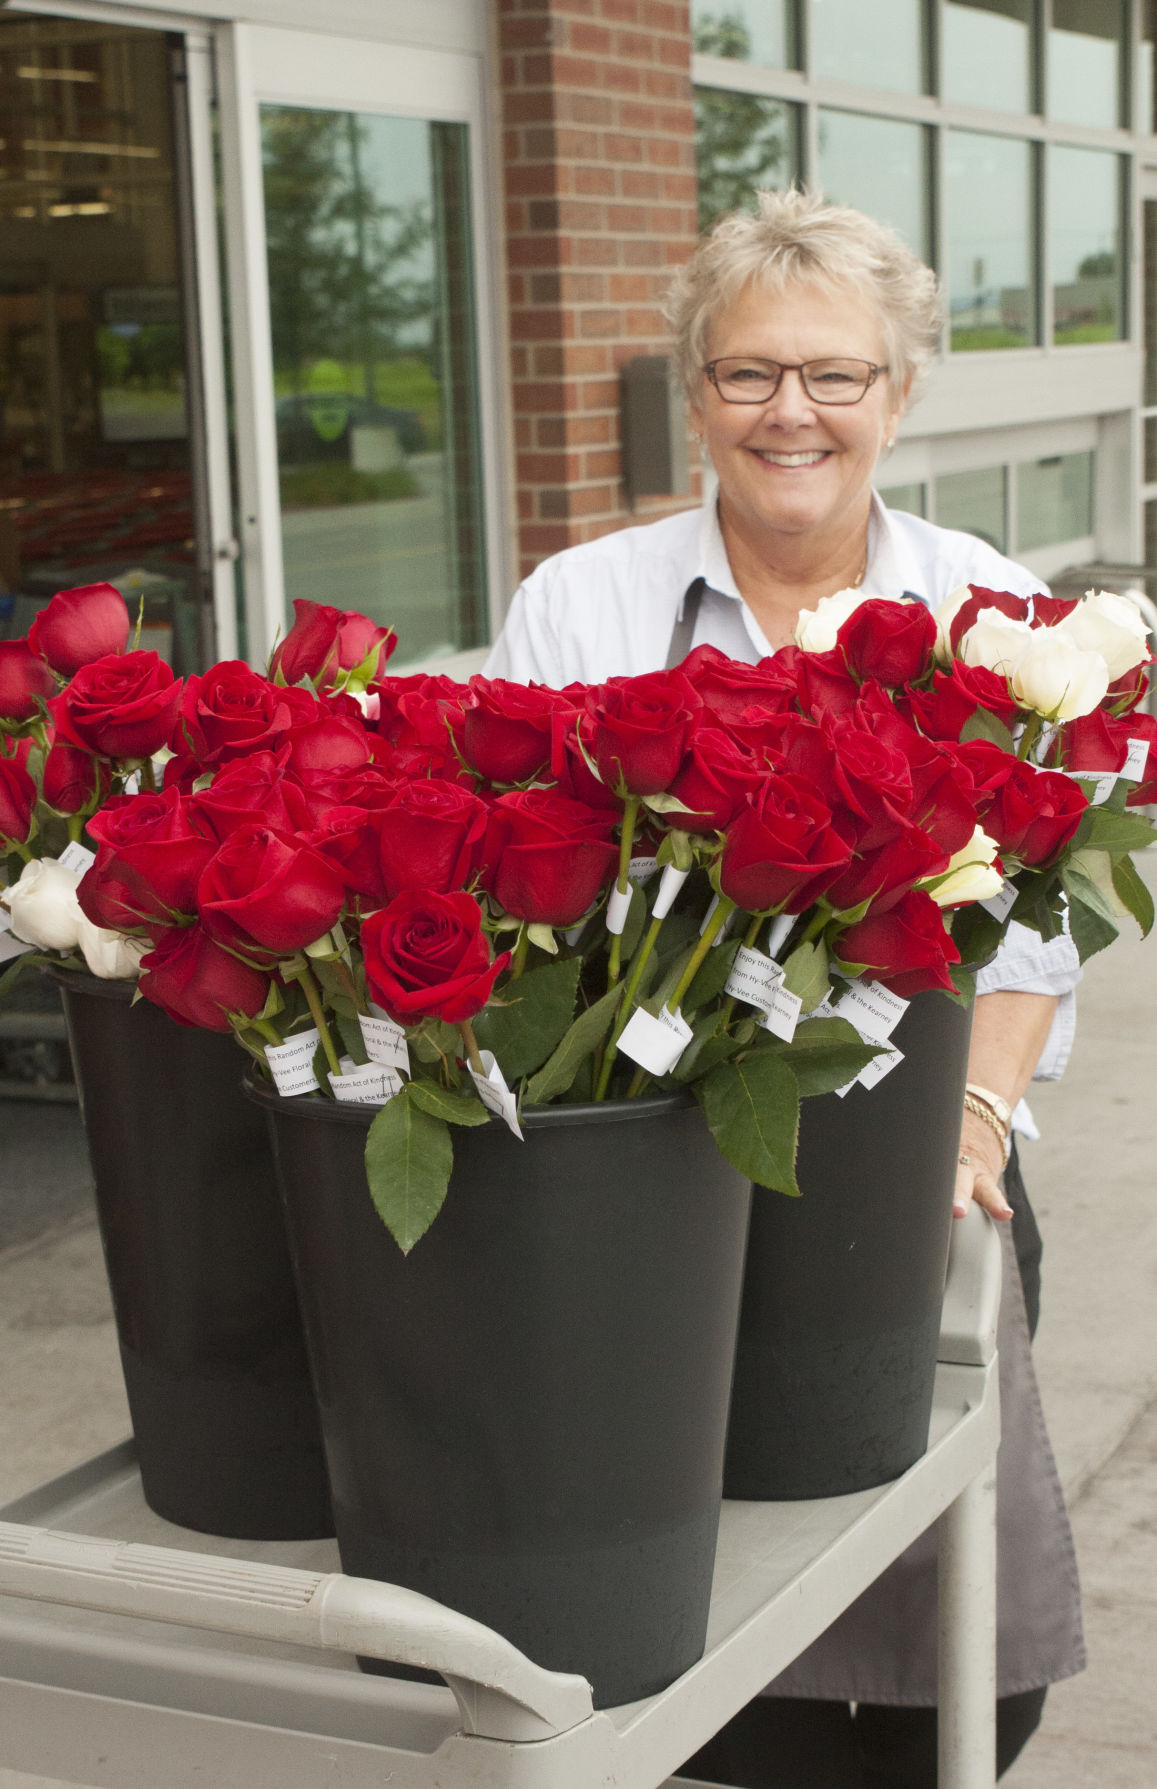 Hy Vee Floral Team Delivers 1 200 Roses To Hospital Patients Local News Kearneyhub Com